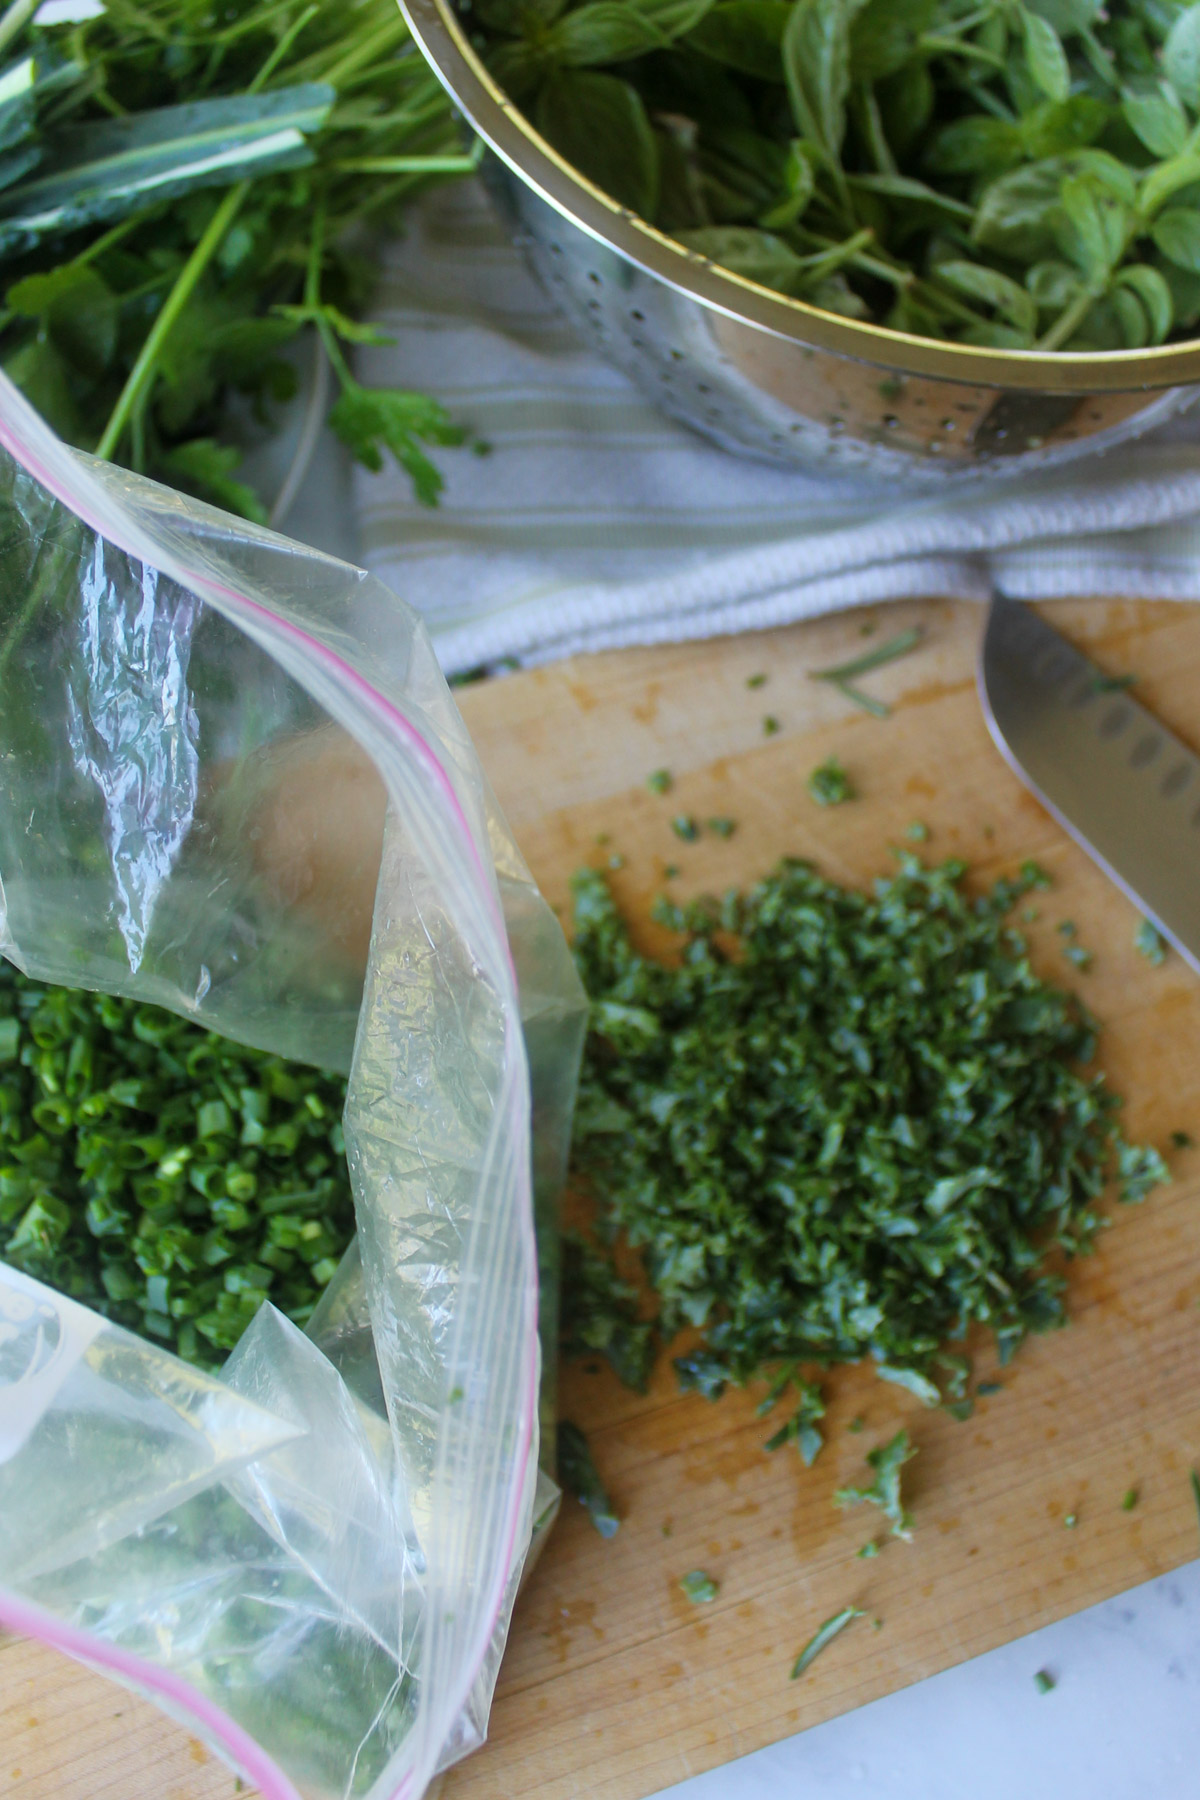 An open freezer bag with chopped herbs in it and some on a cutting board.